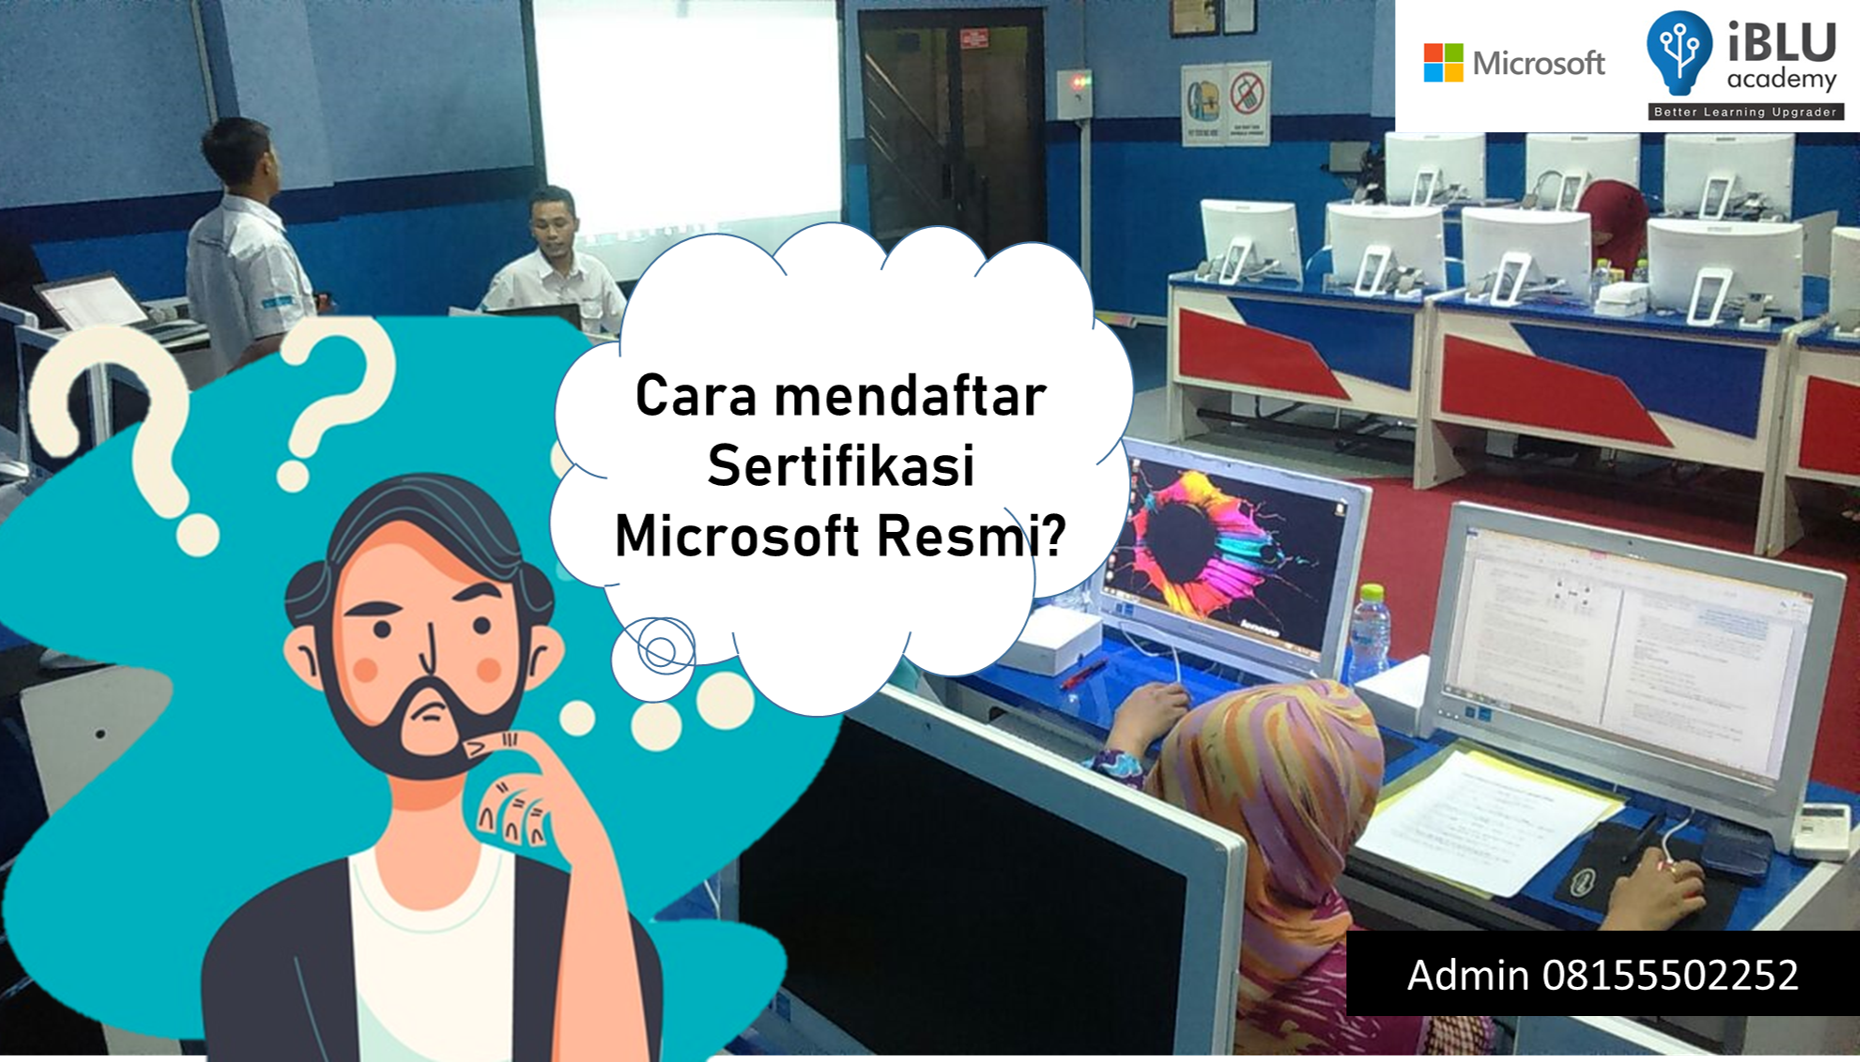 You are currently viewing CARA MENDAPATKAN SERTIFIKAT MICROSOFT OFFICE SPESIALIST